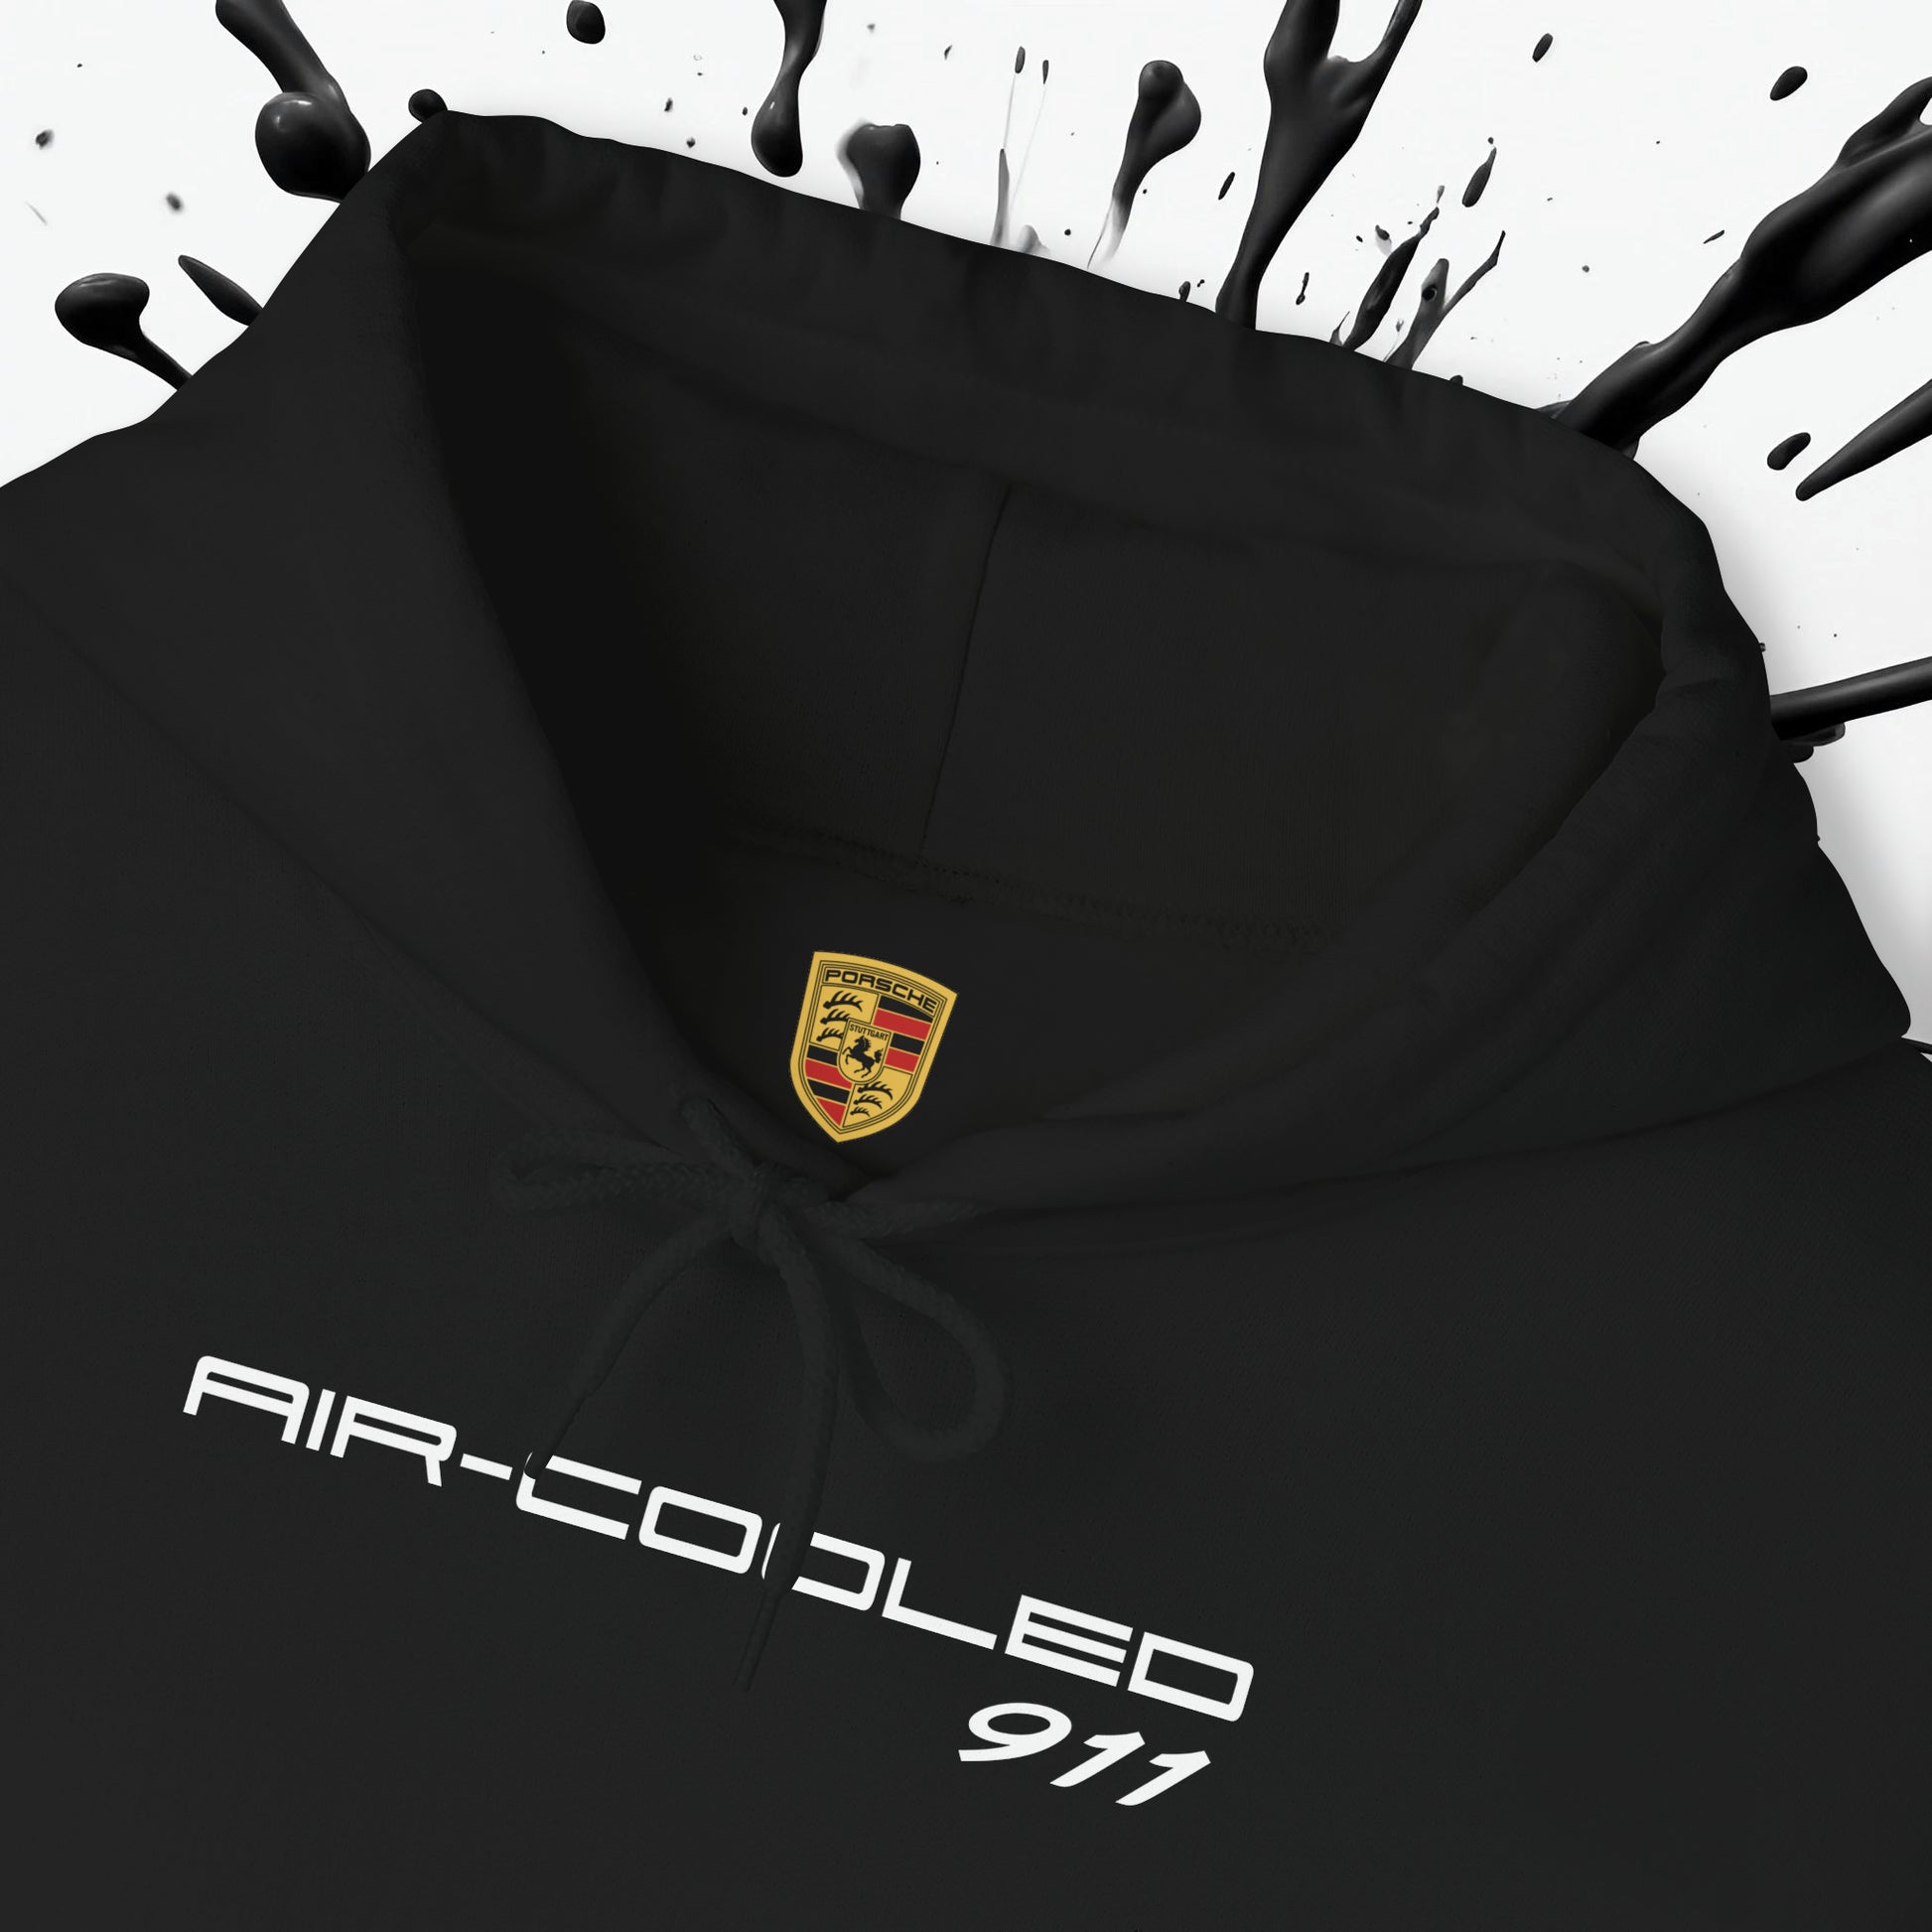 Porsche 911 Air-Cooled Unisex Hoodie -- Heritage - Homage - Cozy Hooded Sweatshirt - Gift - Vintage - Hang Out in Warmth - Car Enthusiast Hoodie AI Print Spot